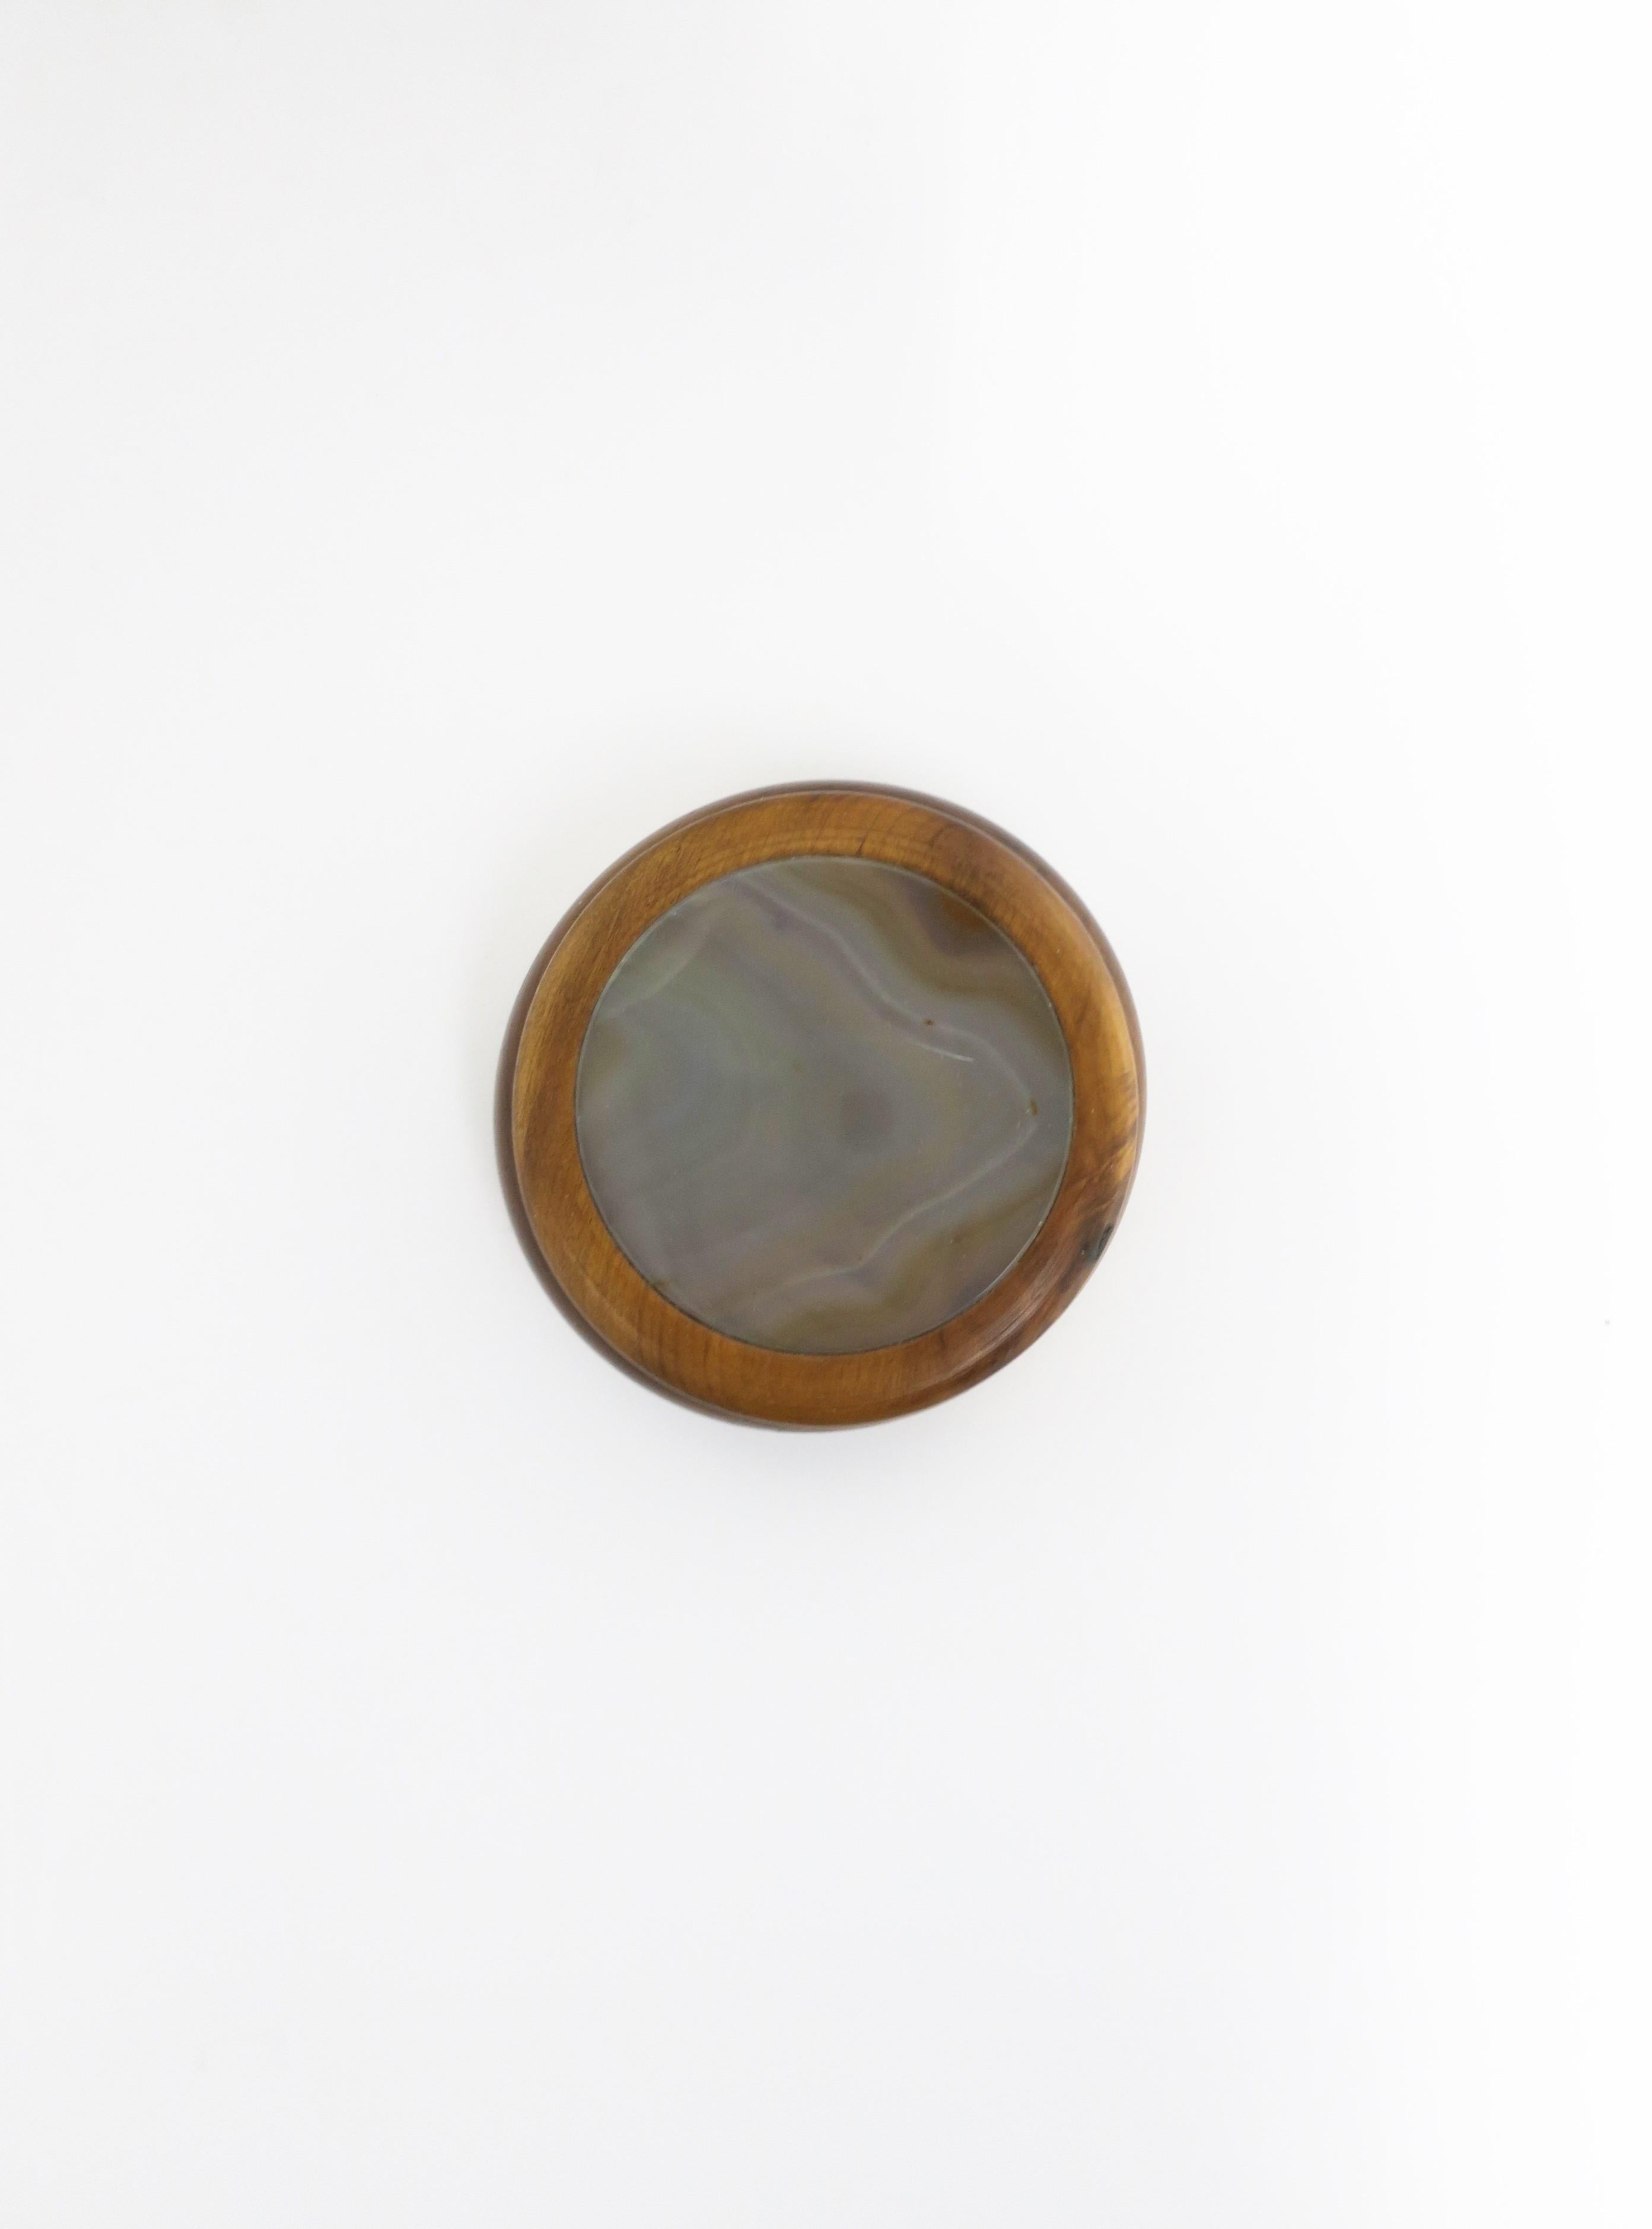 A Brazilian wood and agate onyx round jewelry or trinket box, in the Modern style/Post-Modern period, circa late 20th century, 1980s, Brazil. Agate is a light grey hue. Piece would suffice for a desk, vanity, nightstand table area, etc., for small